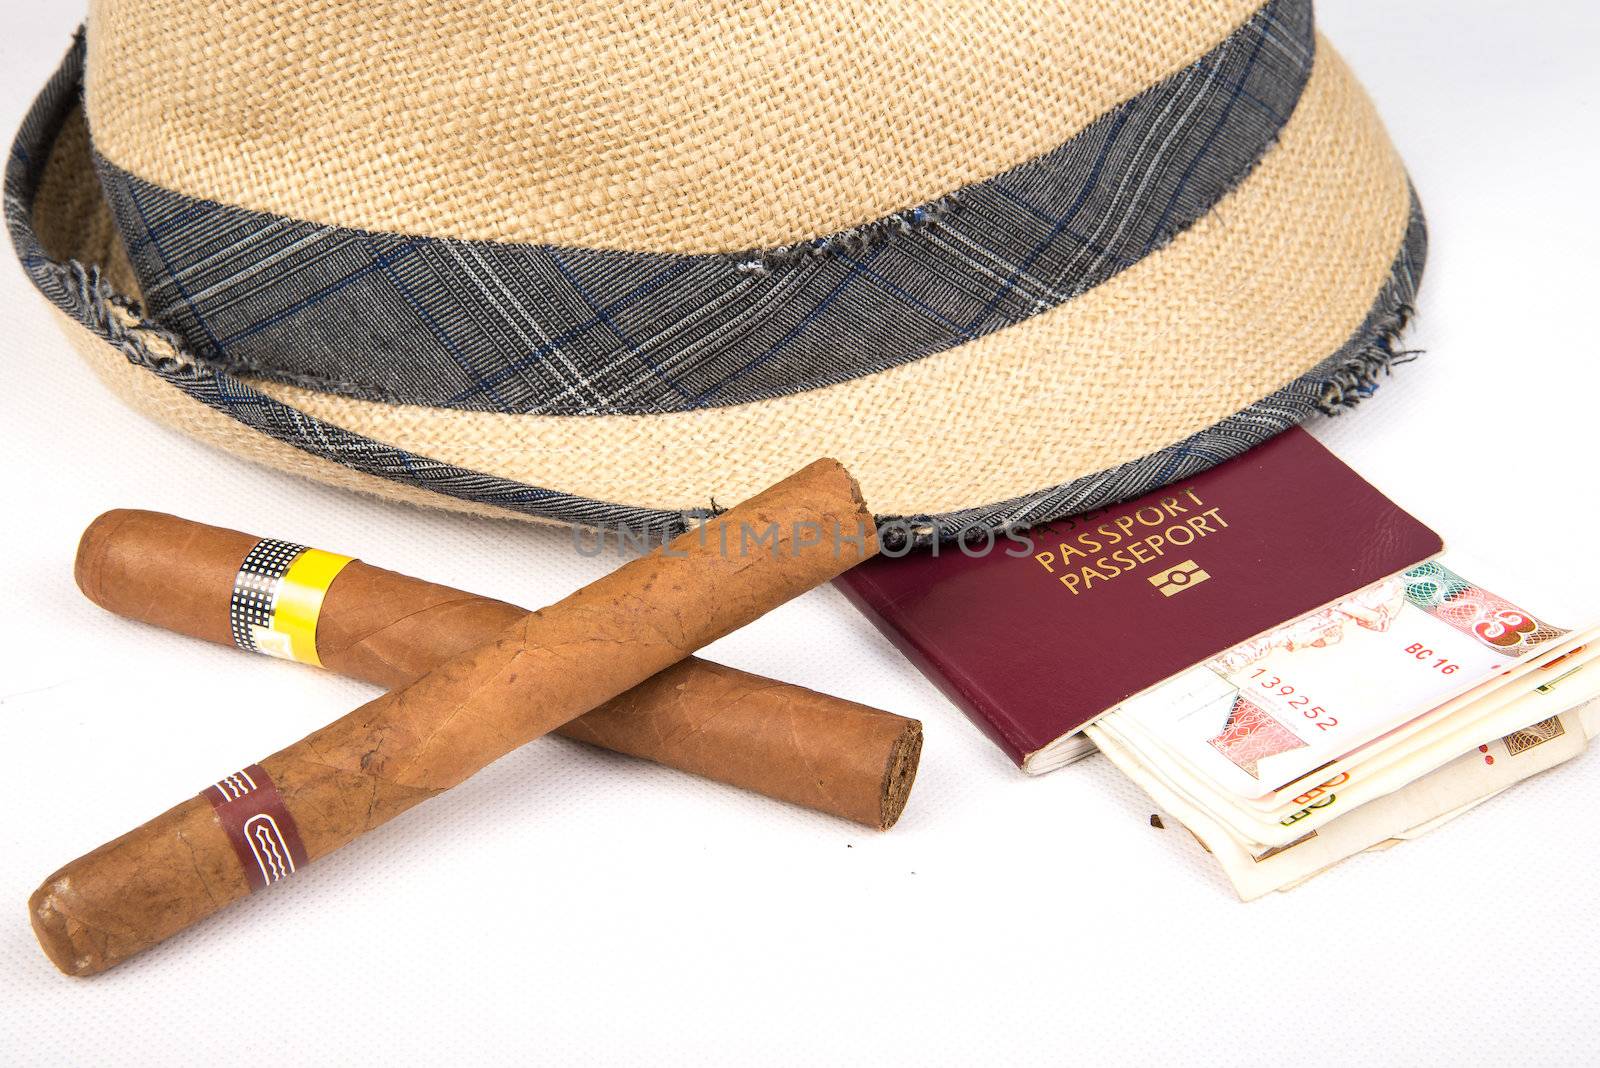 Cuban cigars and hat with passport and cuban currency pesos  on white isolated background